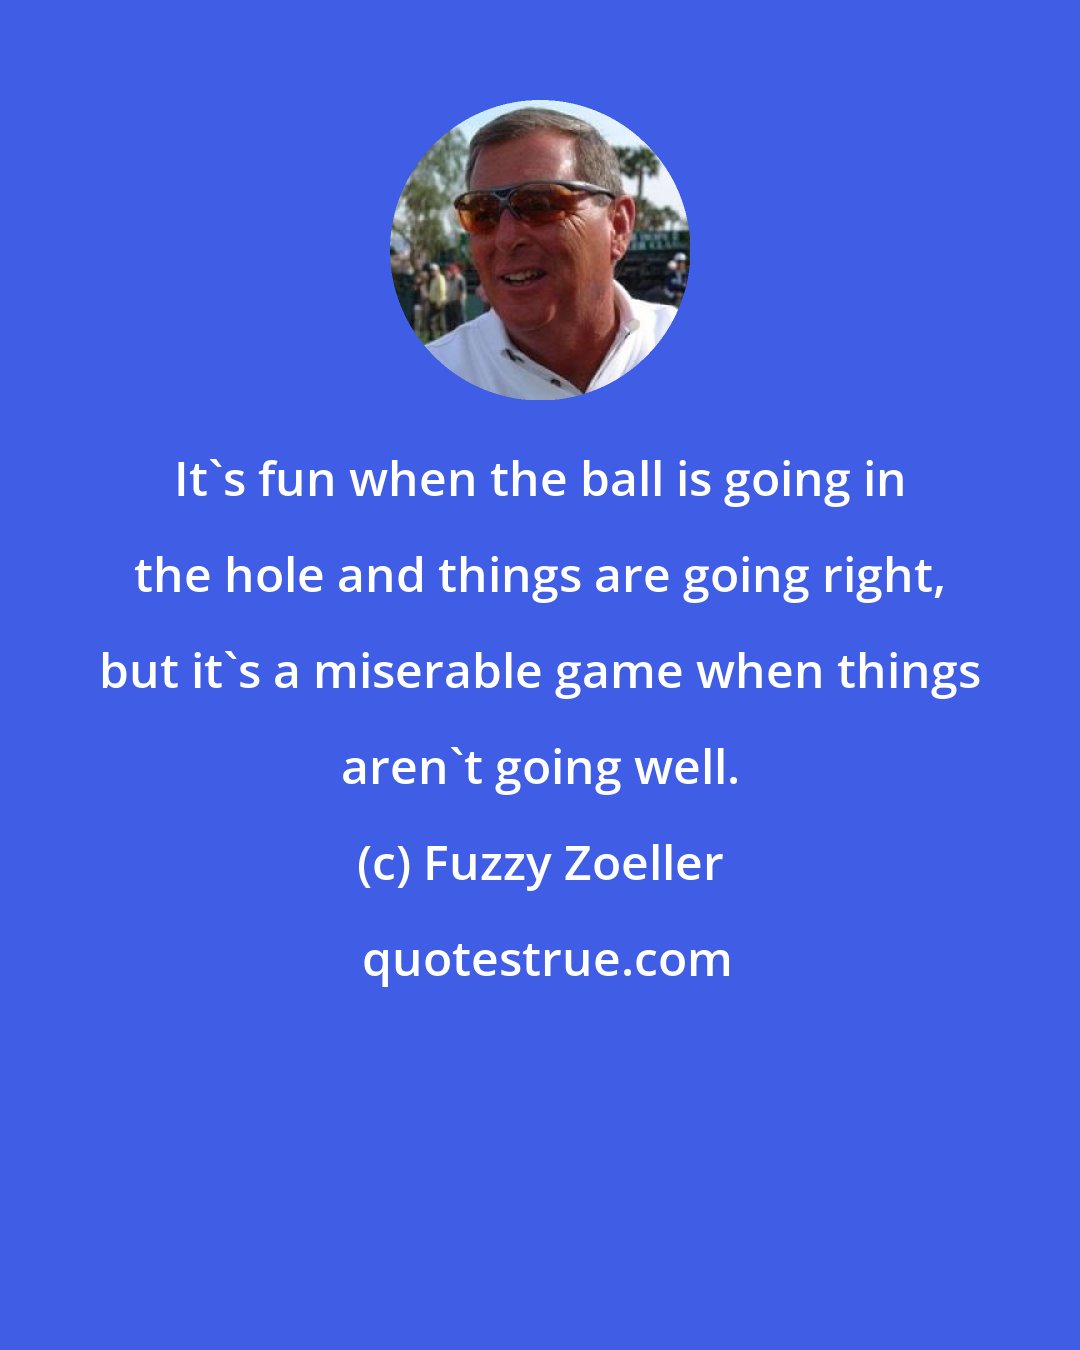 Fuzzy Zoeller: It's fun when the ball is going in the hole and things are going right, but it's a miserable game when things aren't going well.